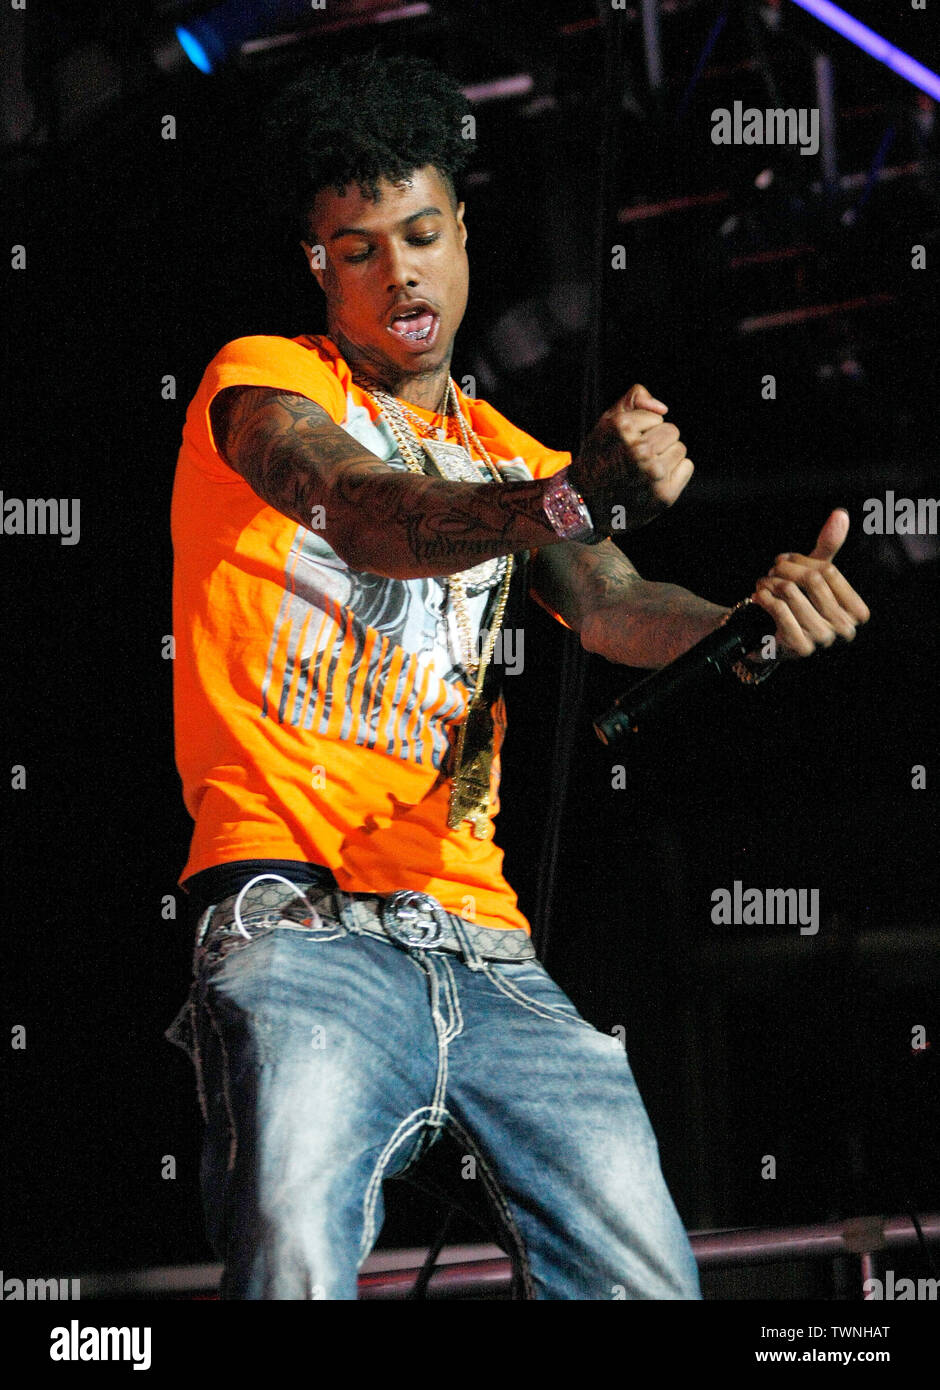 LOS ANGELES, CALIFORNIA - JUNE 21: Blueface performs onstage at the 2019 BET Experience STAPLES Center Concert at Staples Center on June 21, 2019 in Los Angeles, California. Photo: CraSH for imageSPACE Credit: MediaPunch Inc/Alamy Live News Stock Photo